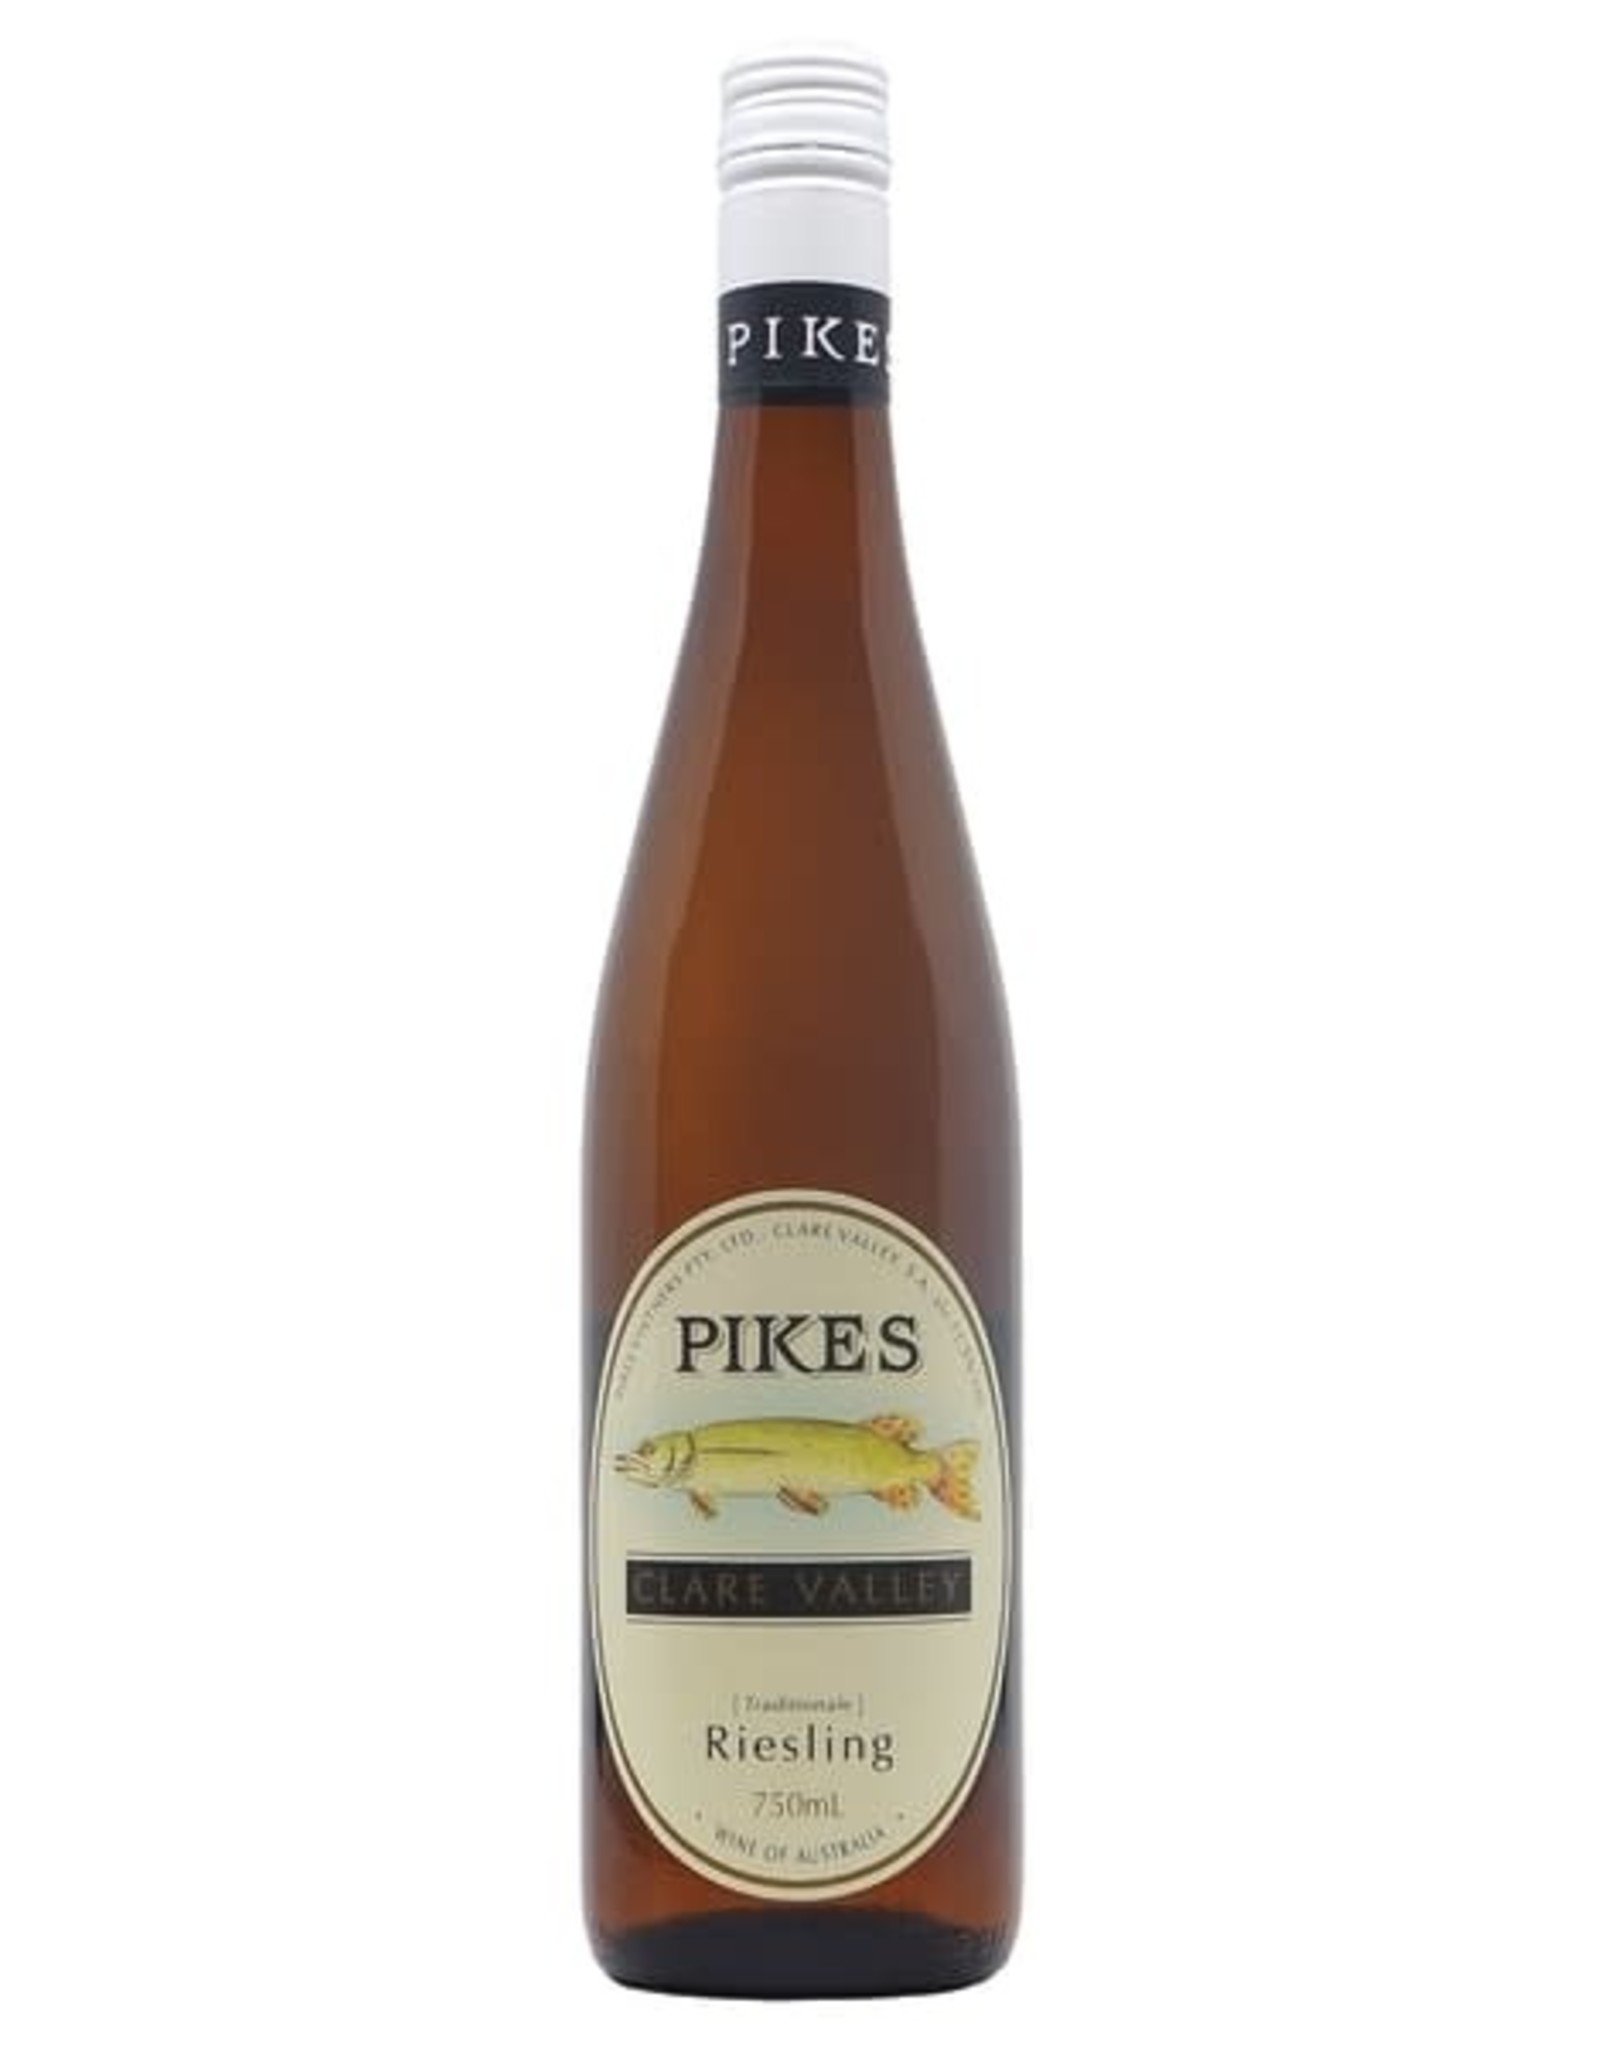 Pikes Pike's Dry Riesling, Clare Valley 2020